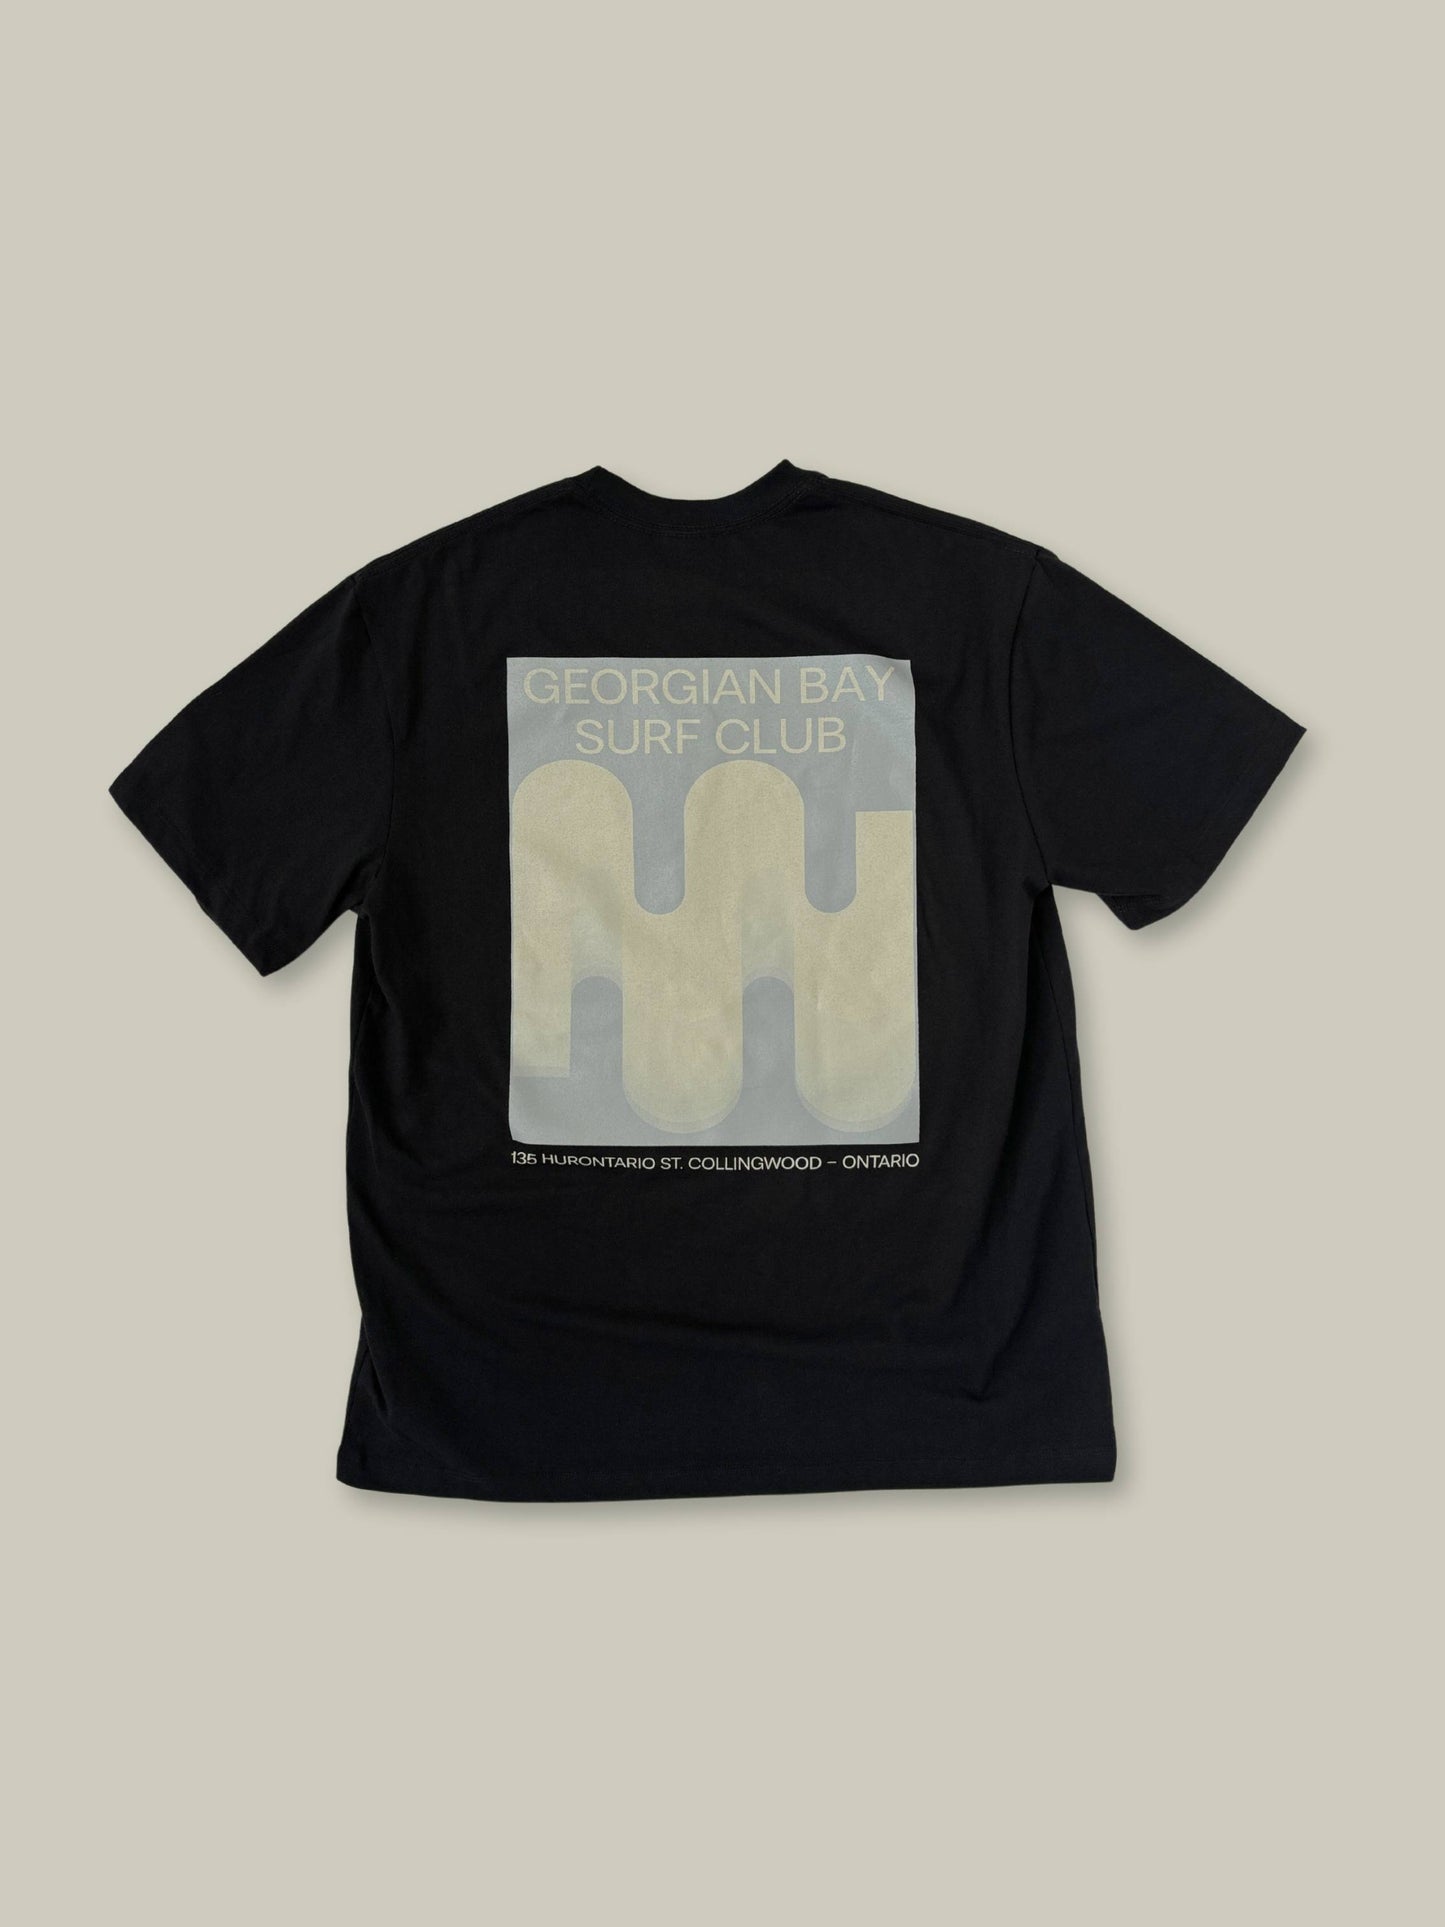 Full view of the back oversized Wave Icon Shadow graphic in beige and tan, on the Black Boomer tee shirt